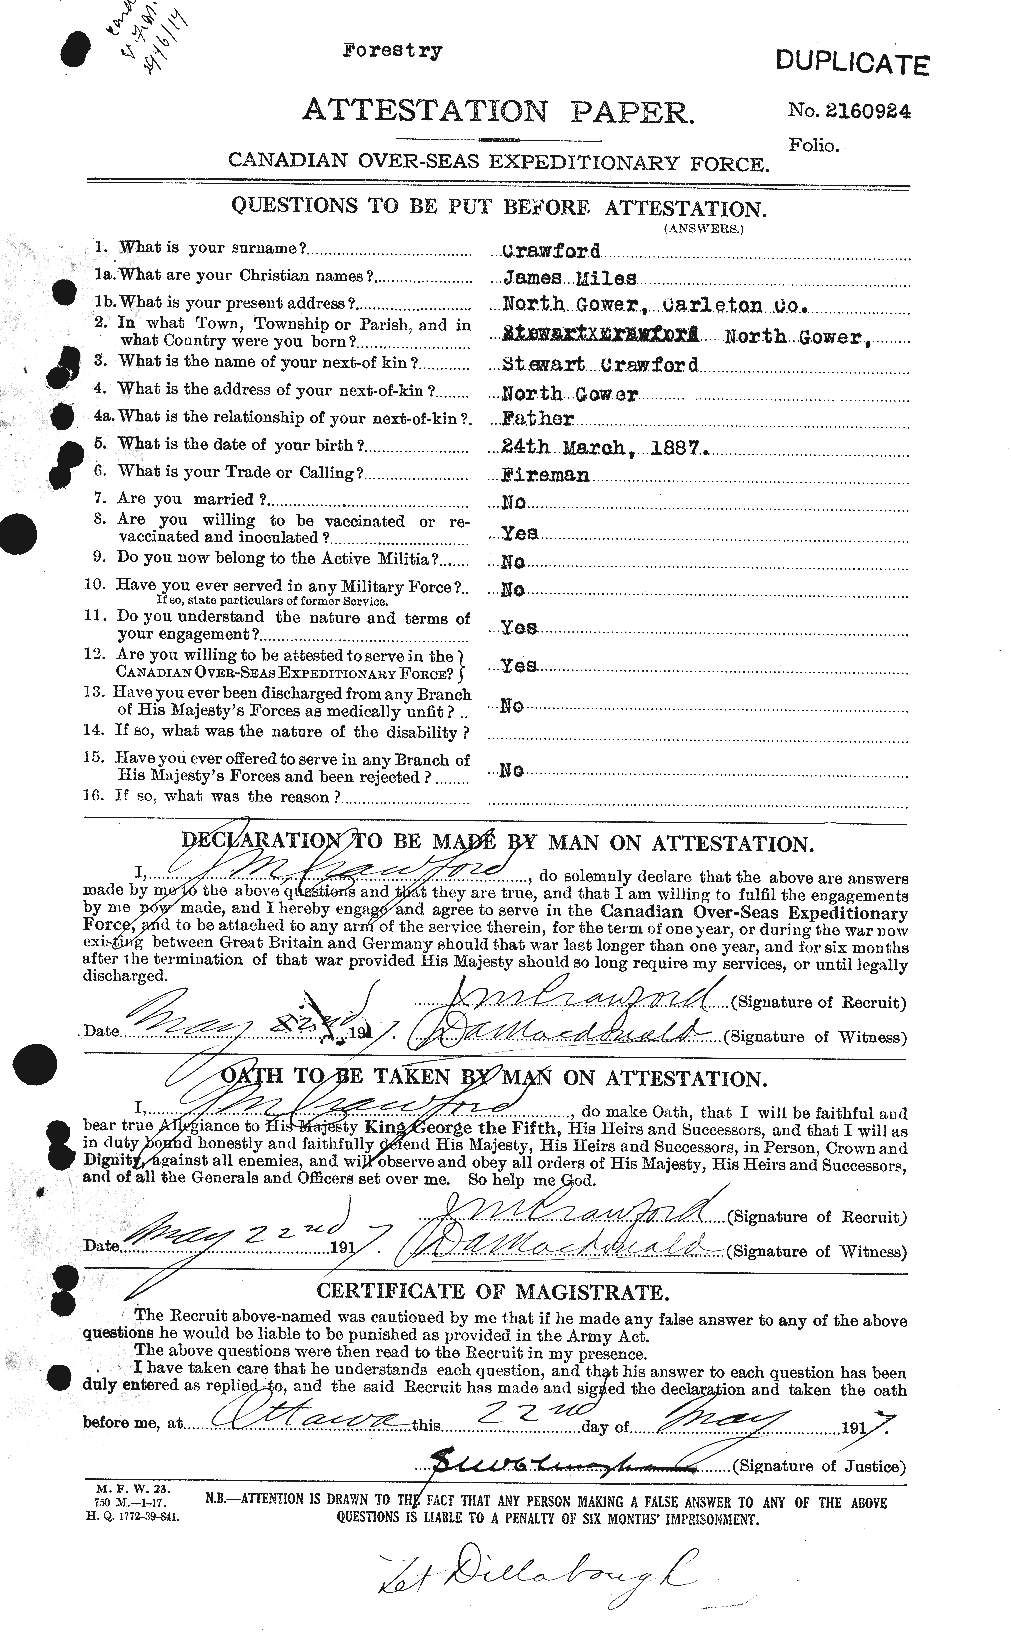 Personnel Records of the First World War - CEF 062474a